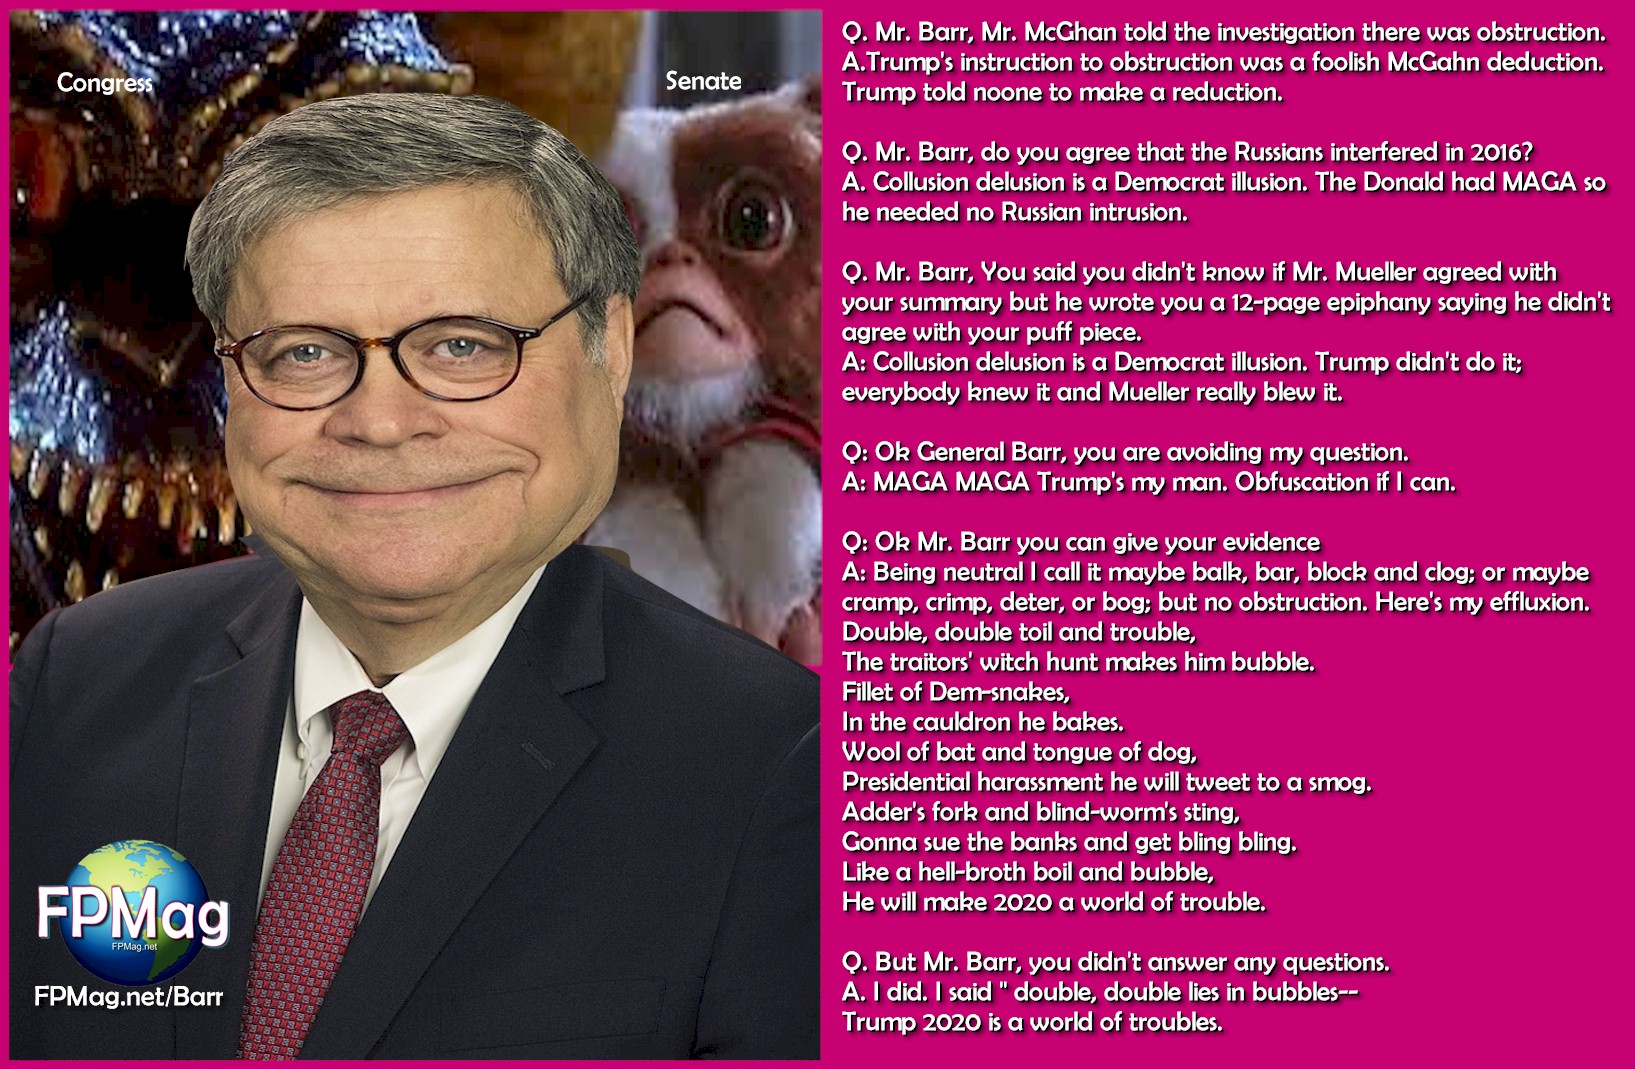 Click Image to enlarge and read US Attorney General William Barr testimony before the Senate Judiciary Committee on Capitol Hill in Washington, DC, on May 1, 2019.  The US Attorney General told the Senate Judiciary Committee, double, double lies in bubbles-- Trump 2020 is a world of troubles.Photo Art: Rosa Yamamoto FPMag